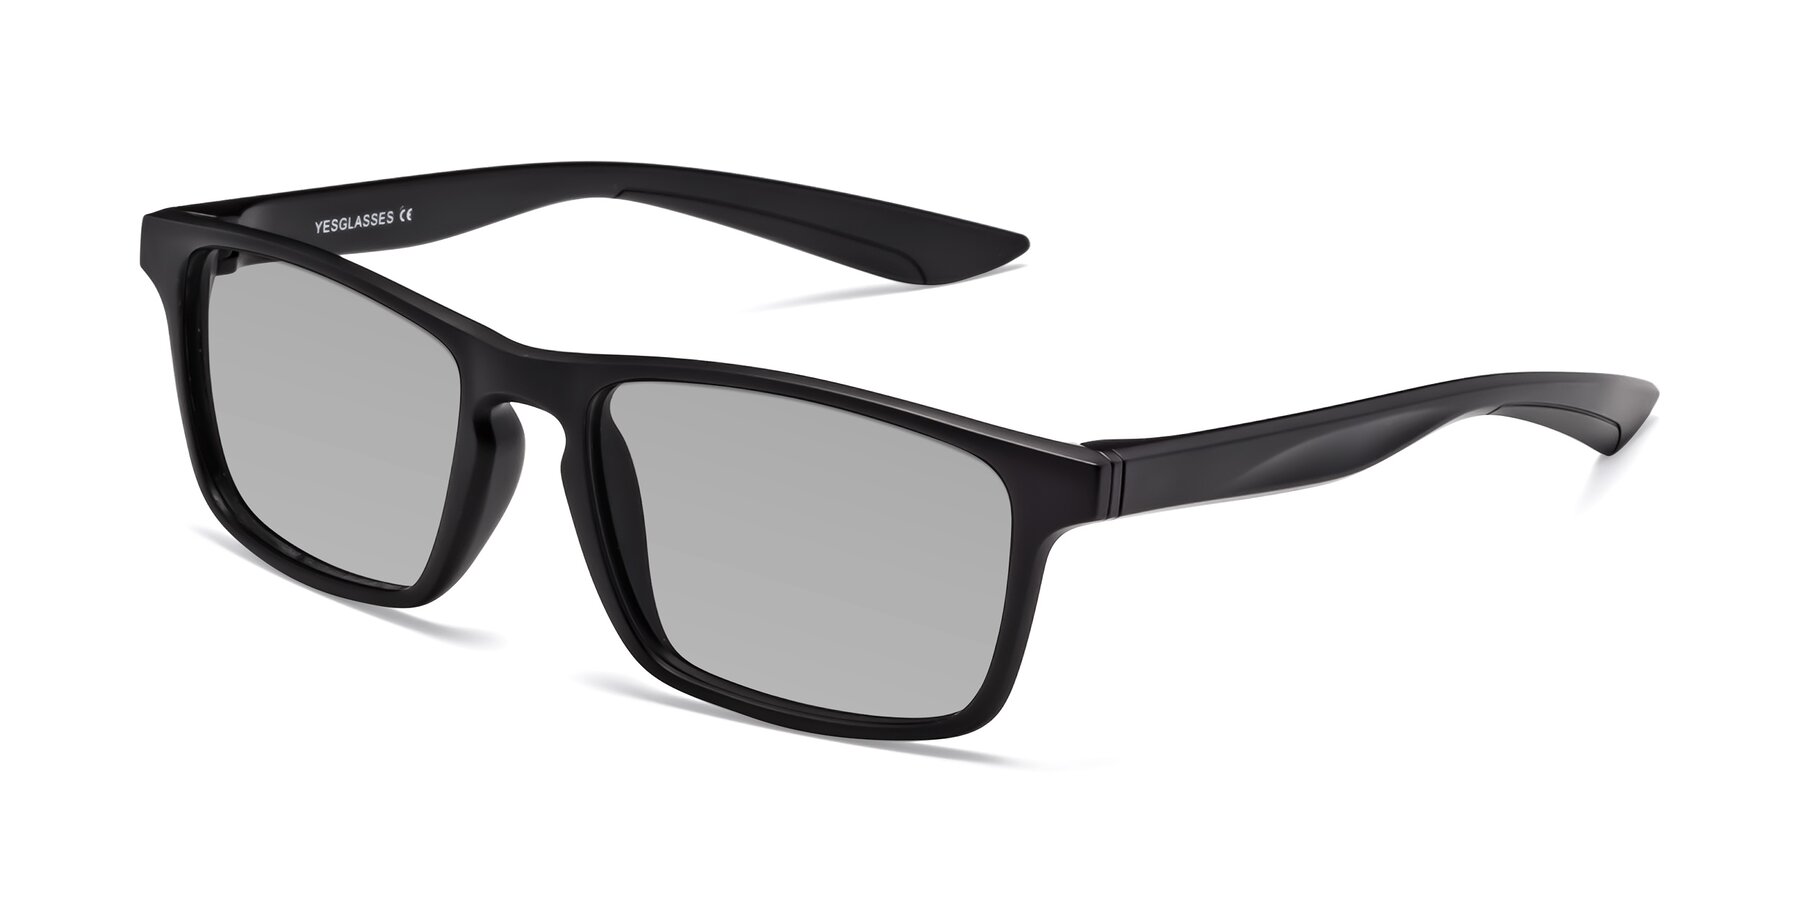 Angle of Passion in Matte Black with Light Gray Tinted Lenses